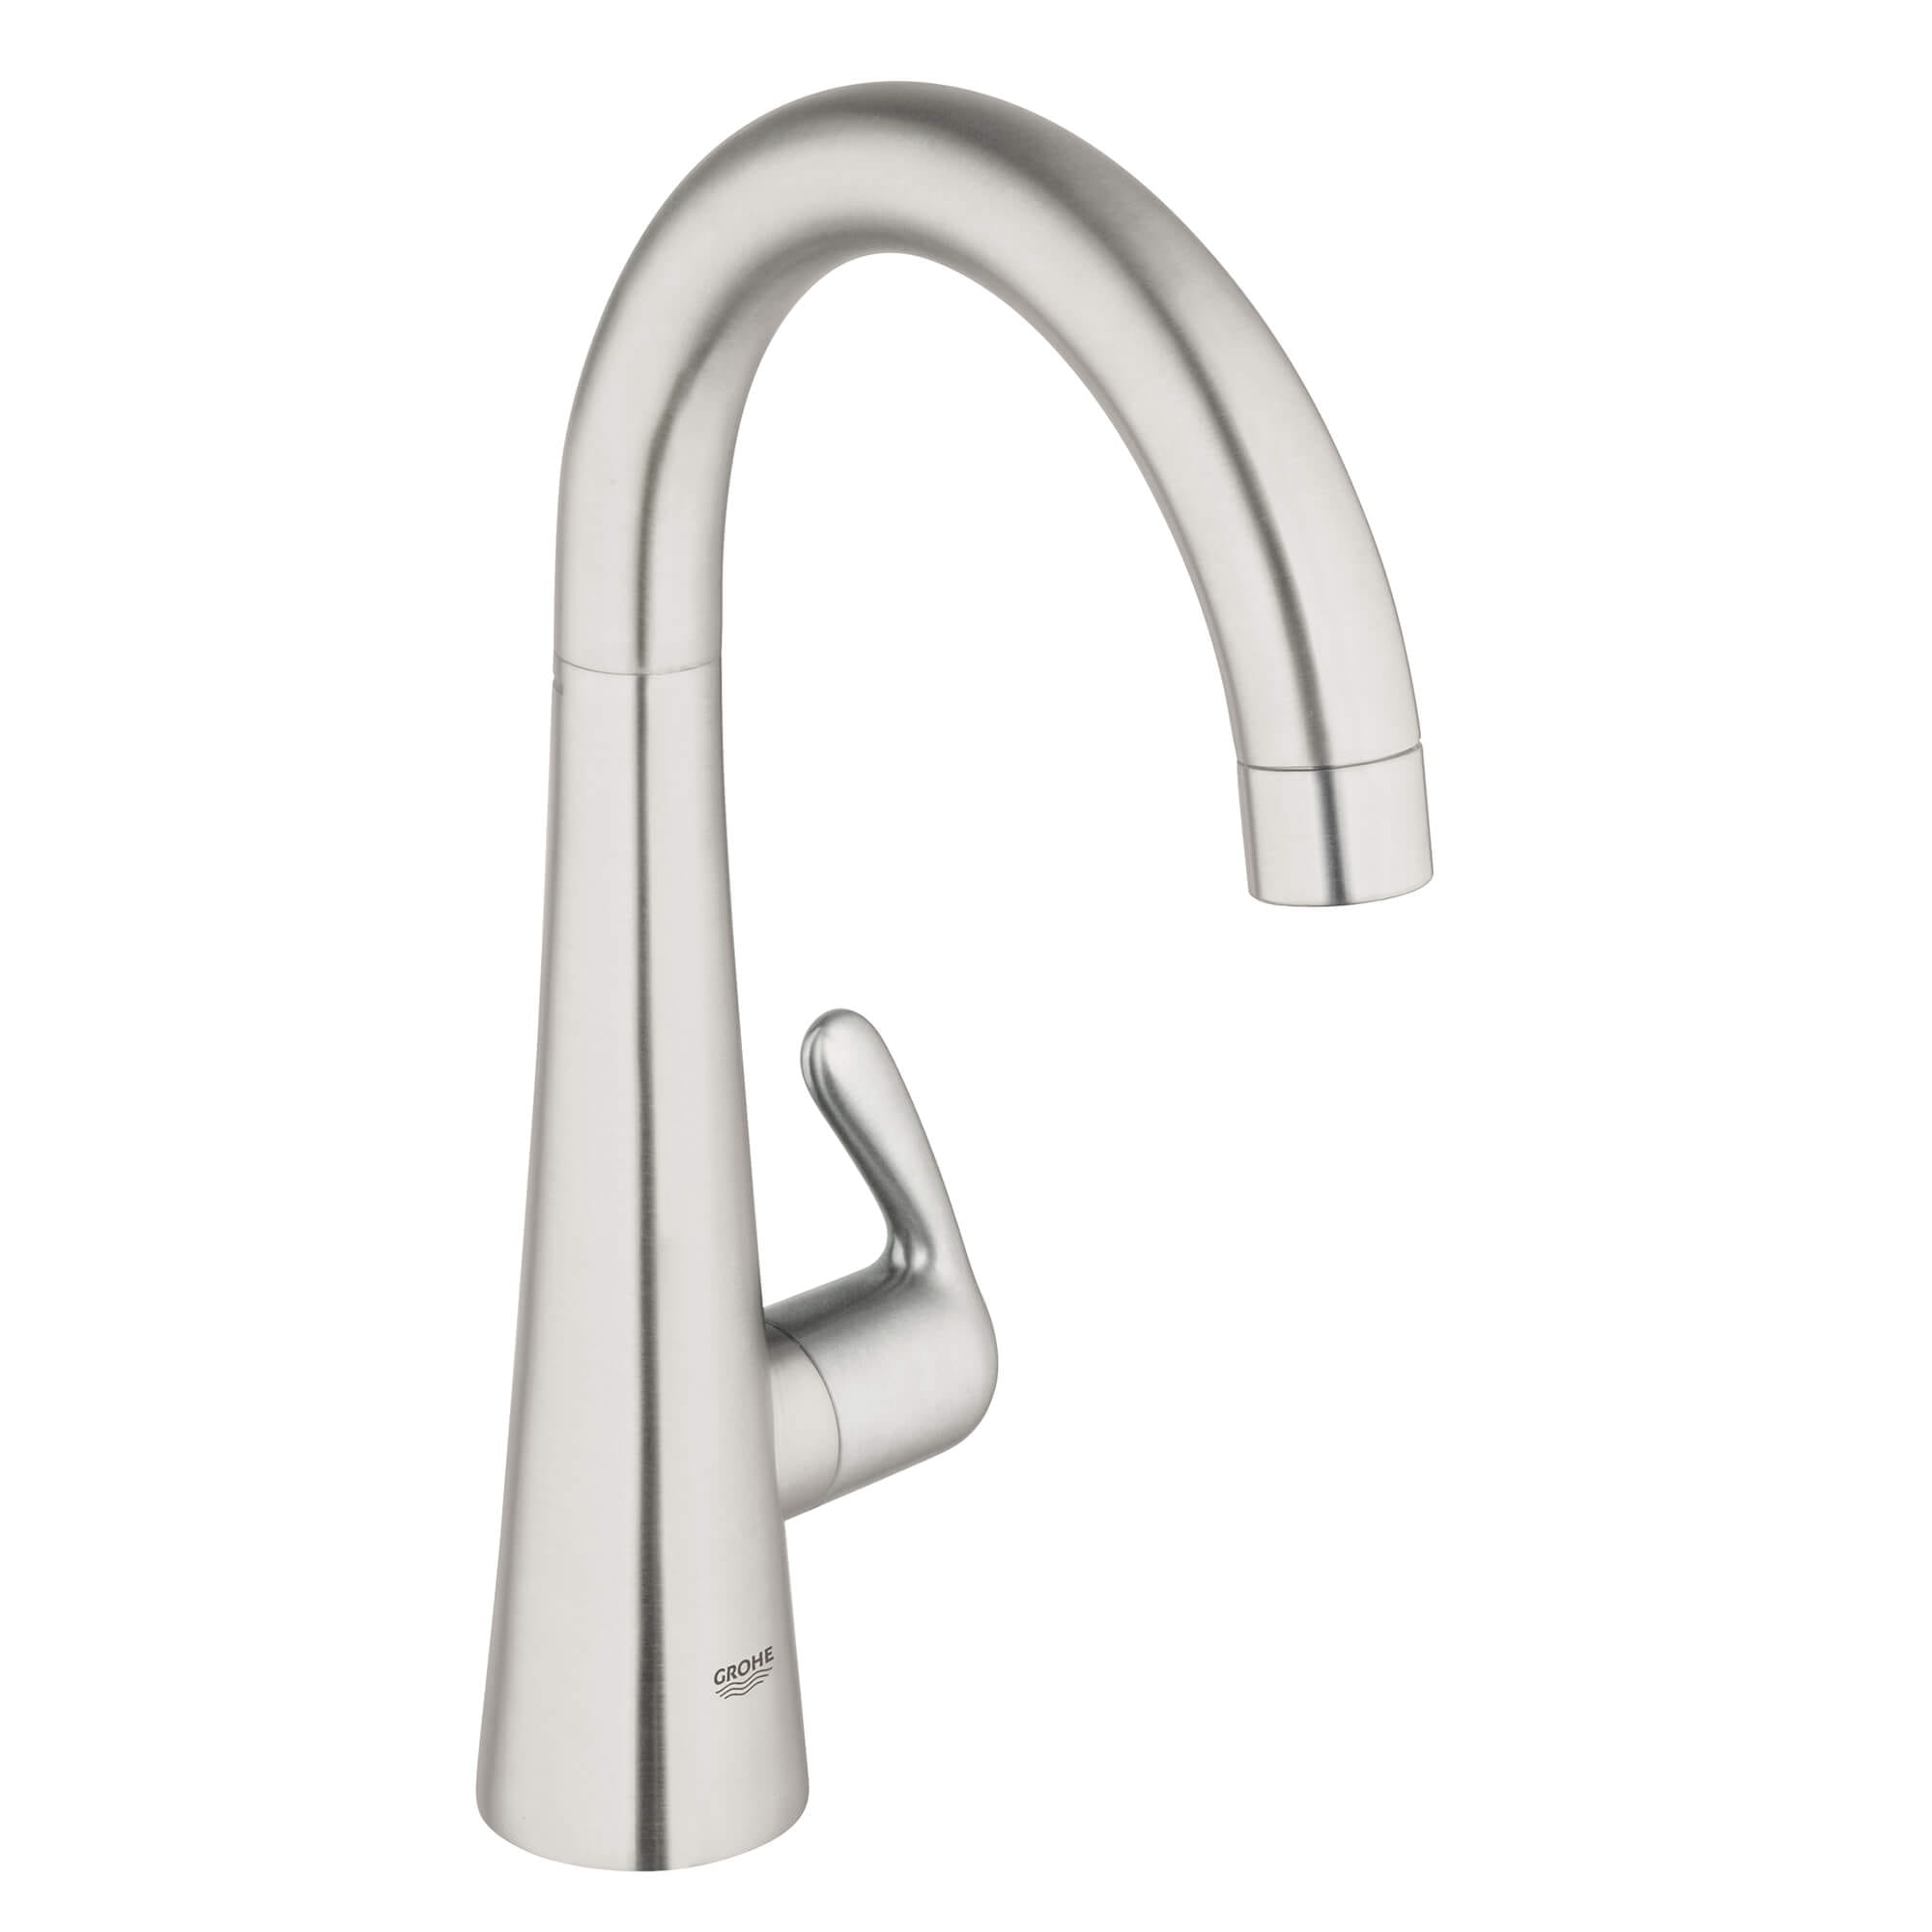 Single Handle Pillar Tap Water Faucet 175 GPM GROHE STAINLESS STEEL, BRUSHED